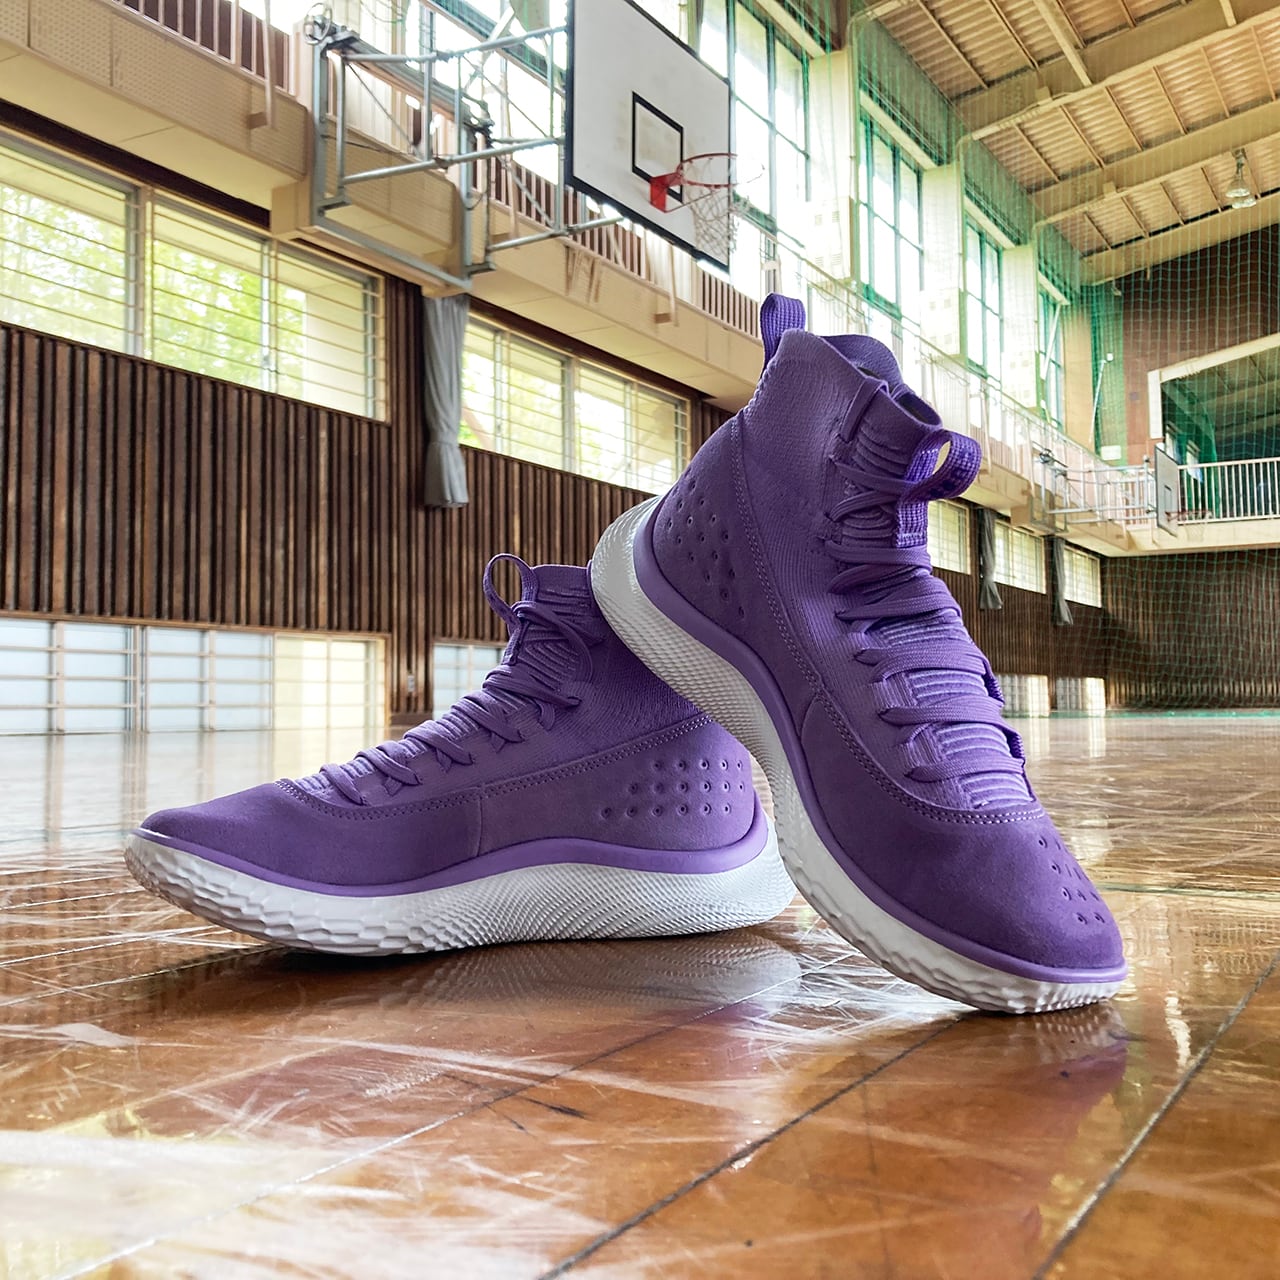 Under Armour Curry 4 Flotro アンダーアーマー カリー4 フロトロ